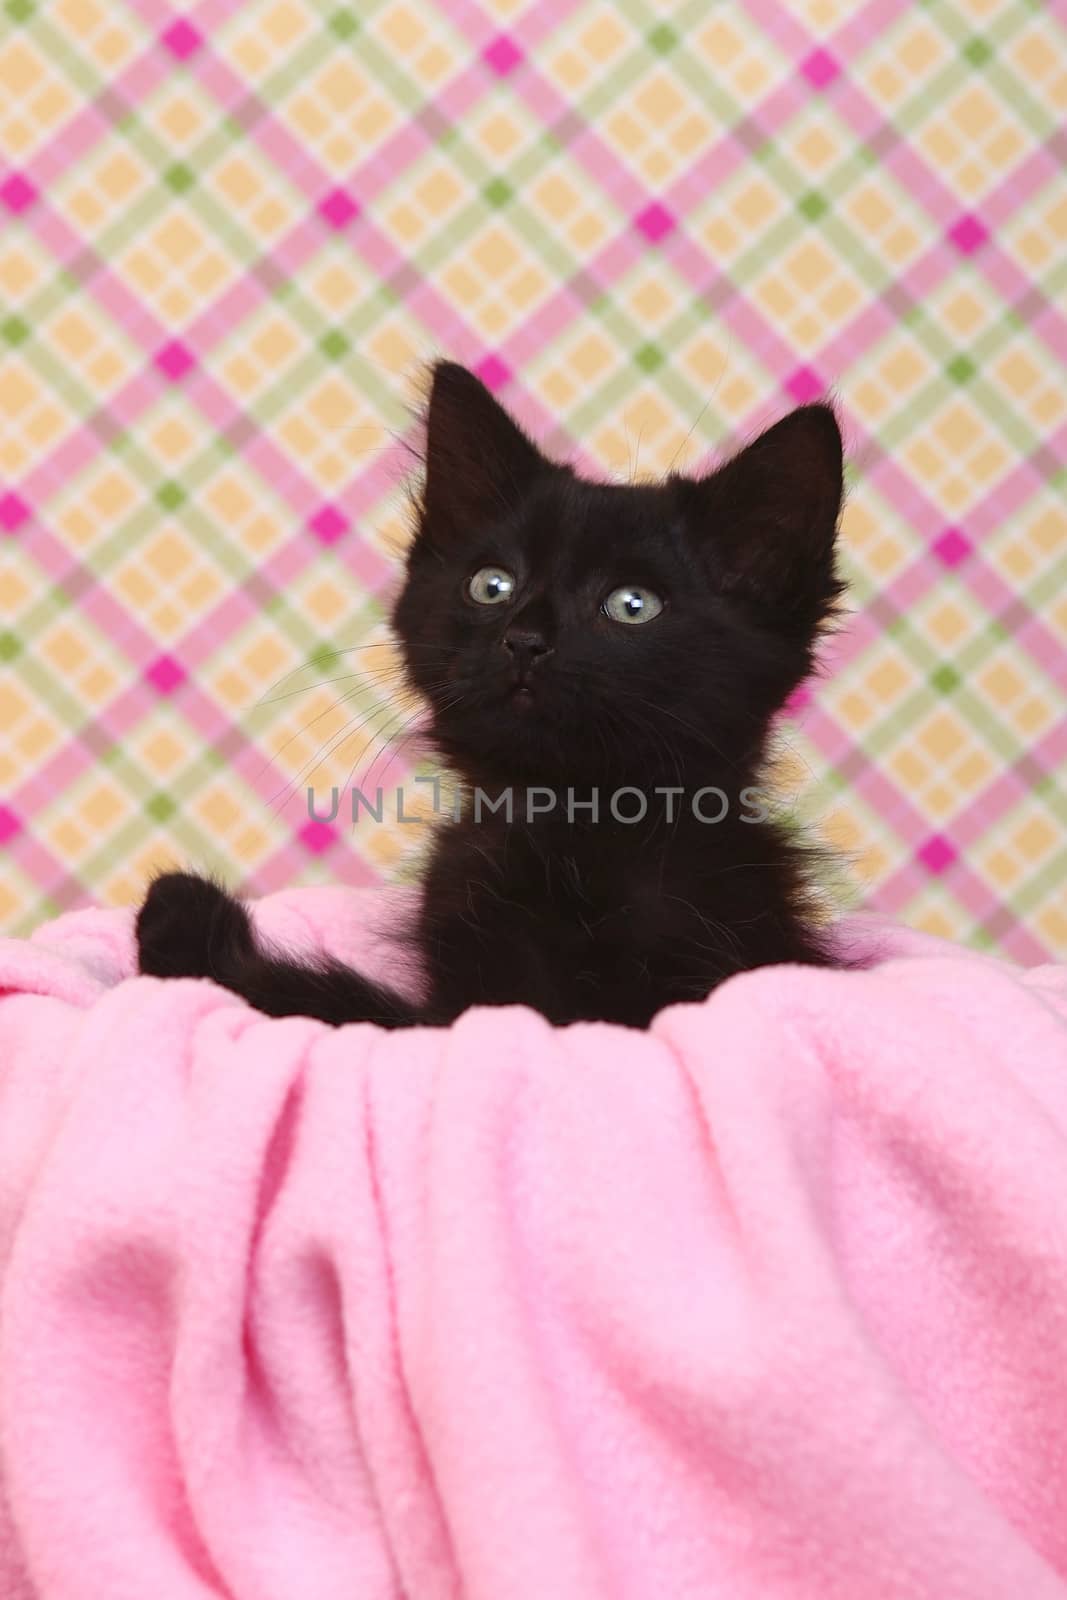 Curious Kitten on a Pink Soft Background by tobkatrina